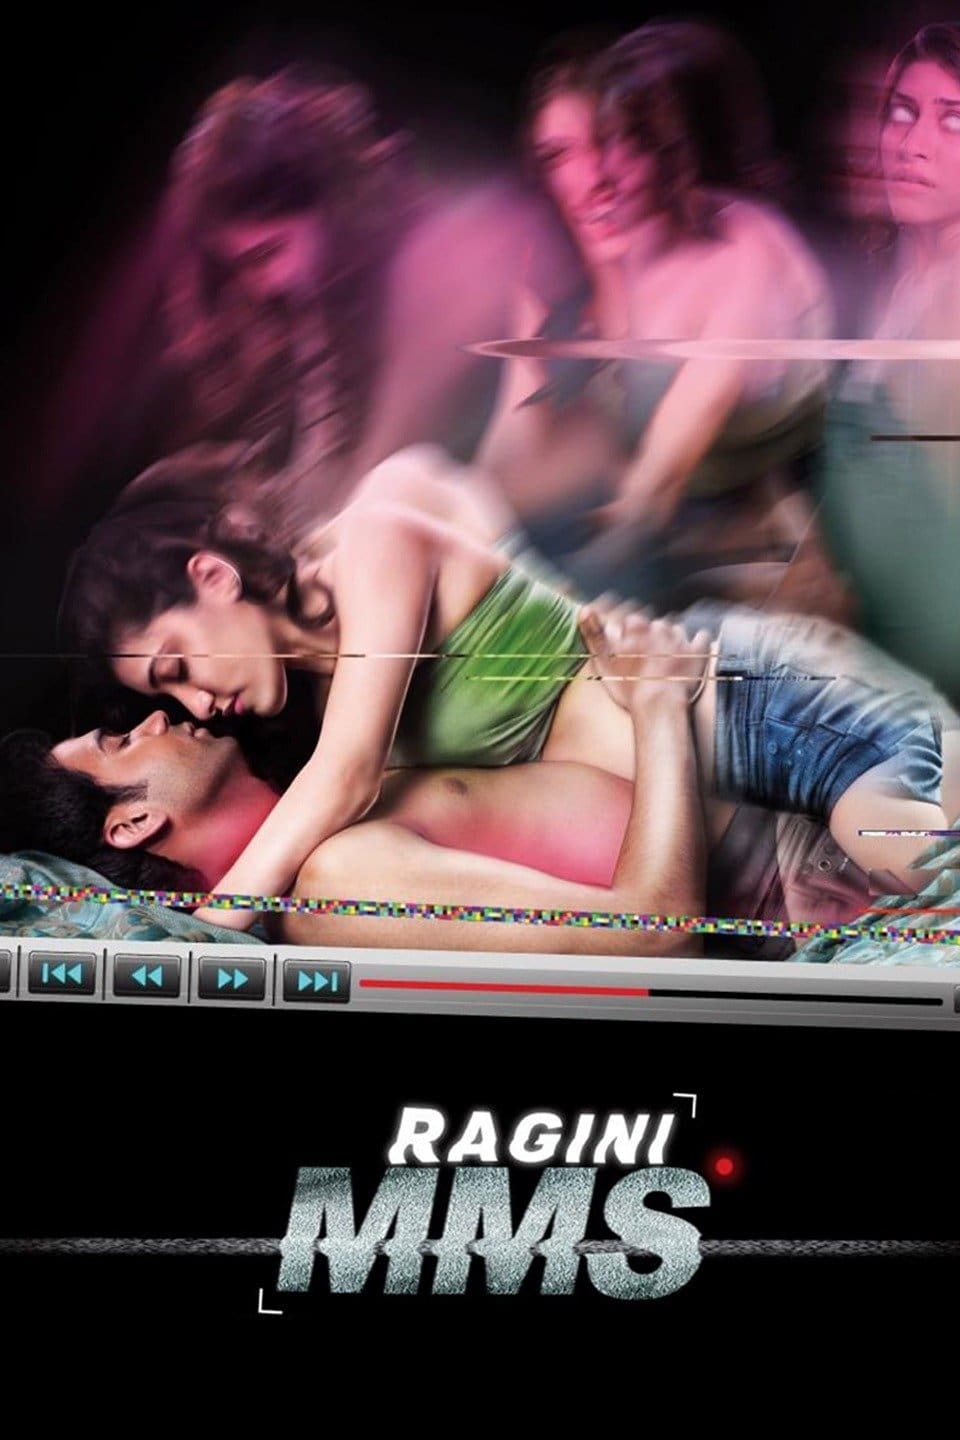 Poster for the movie "Ragini MMS"